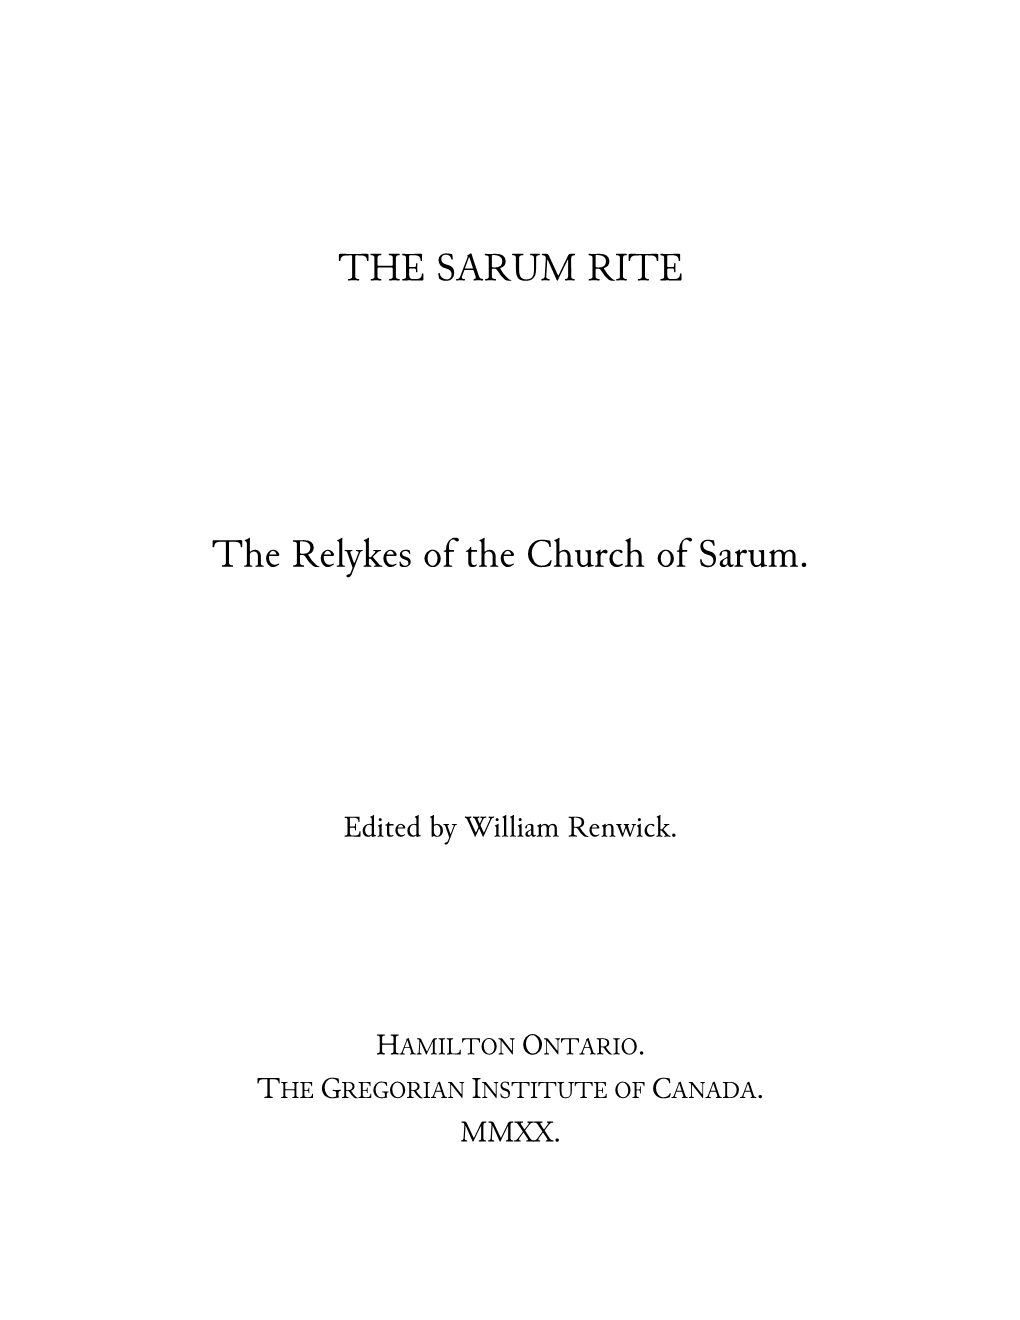 THE SARUM RITE the Relykes of the Church of Sarum